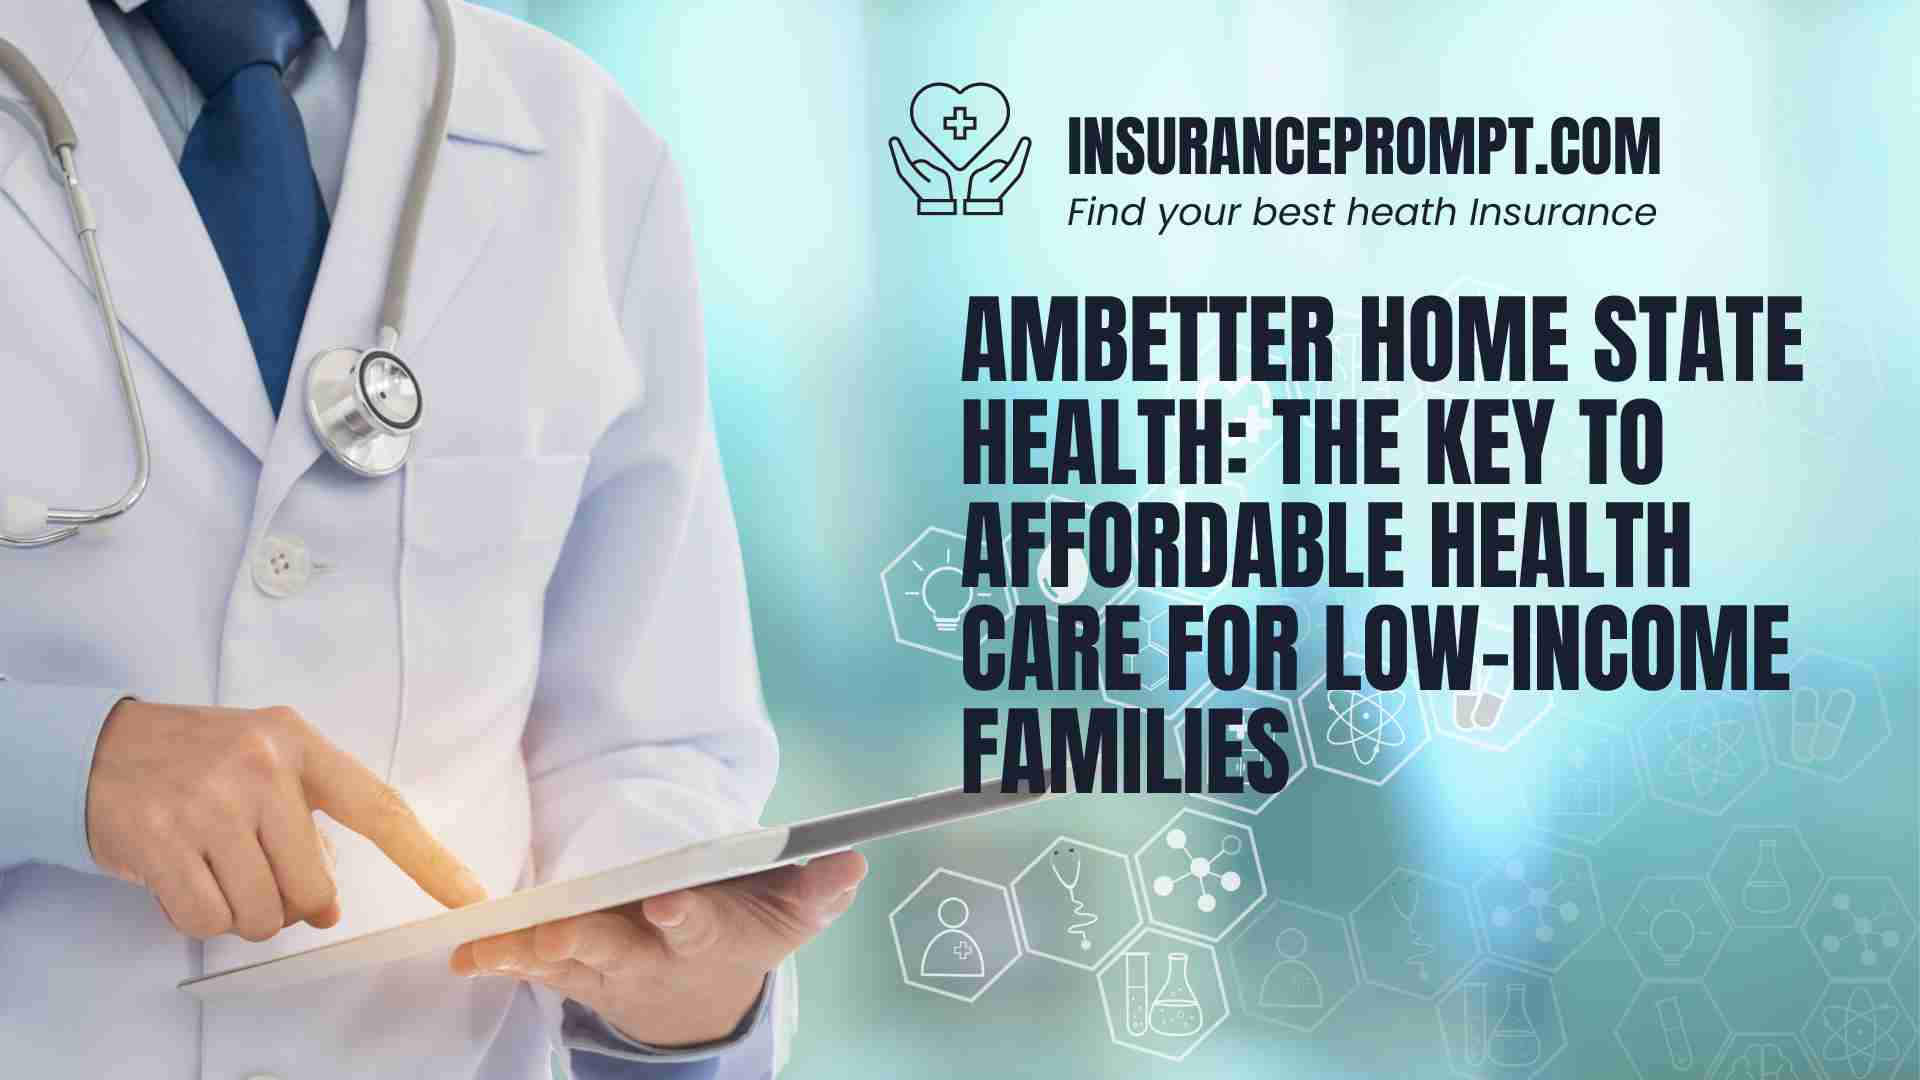 Ambetter Home State Health The Key to Affordable Health Care for Low-Income Families